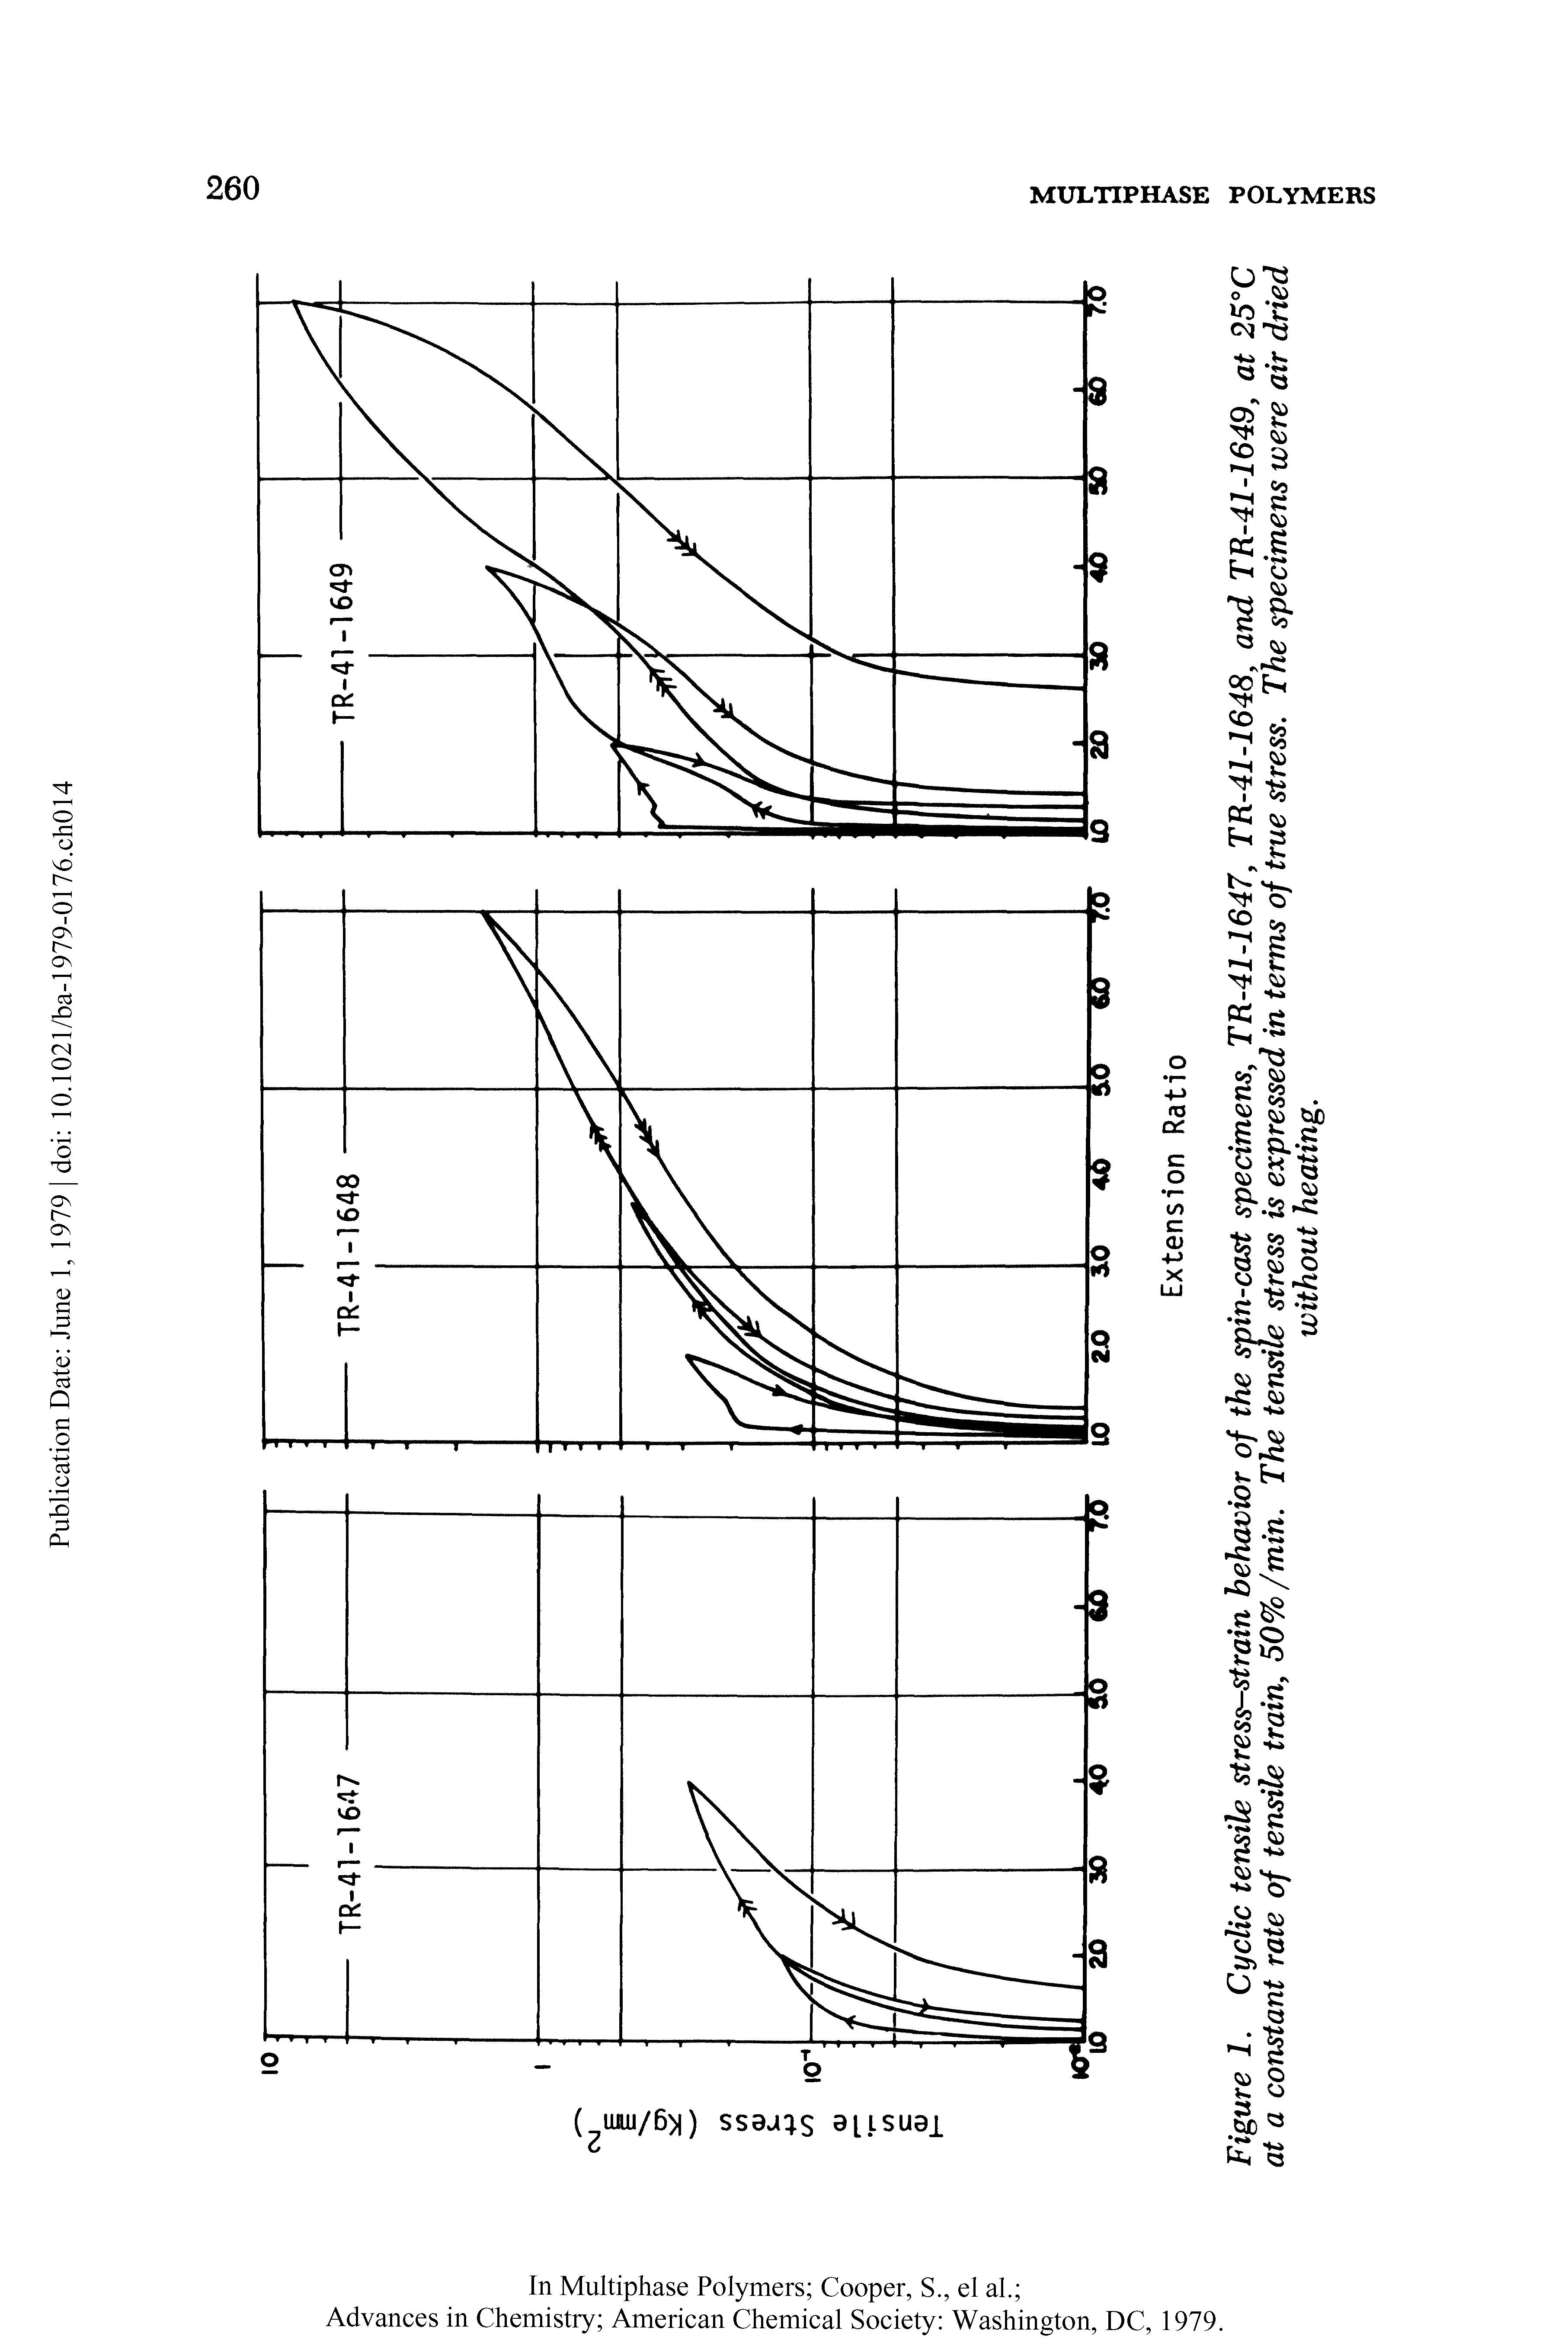 Figure 1. Cyclic tensile stress-strain behavior of the spin-cast specimens, TR-41-1647, TR-41-1648, and TR-41-1649, at 25°C at a constant rate of tensile train, 50% /min. The tensile stress is expressed in terms of true stress. The specimens were air dried...